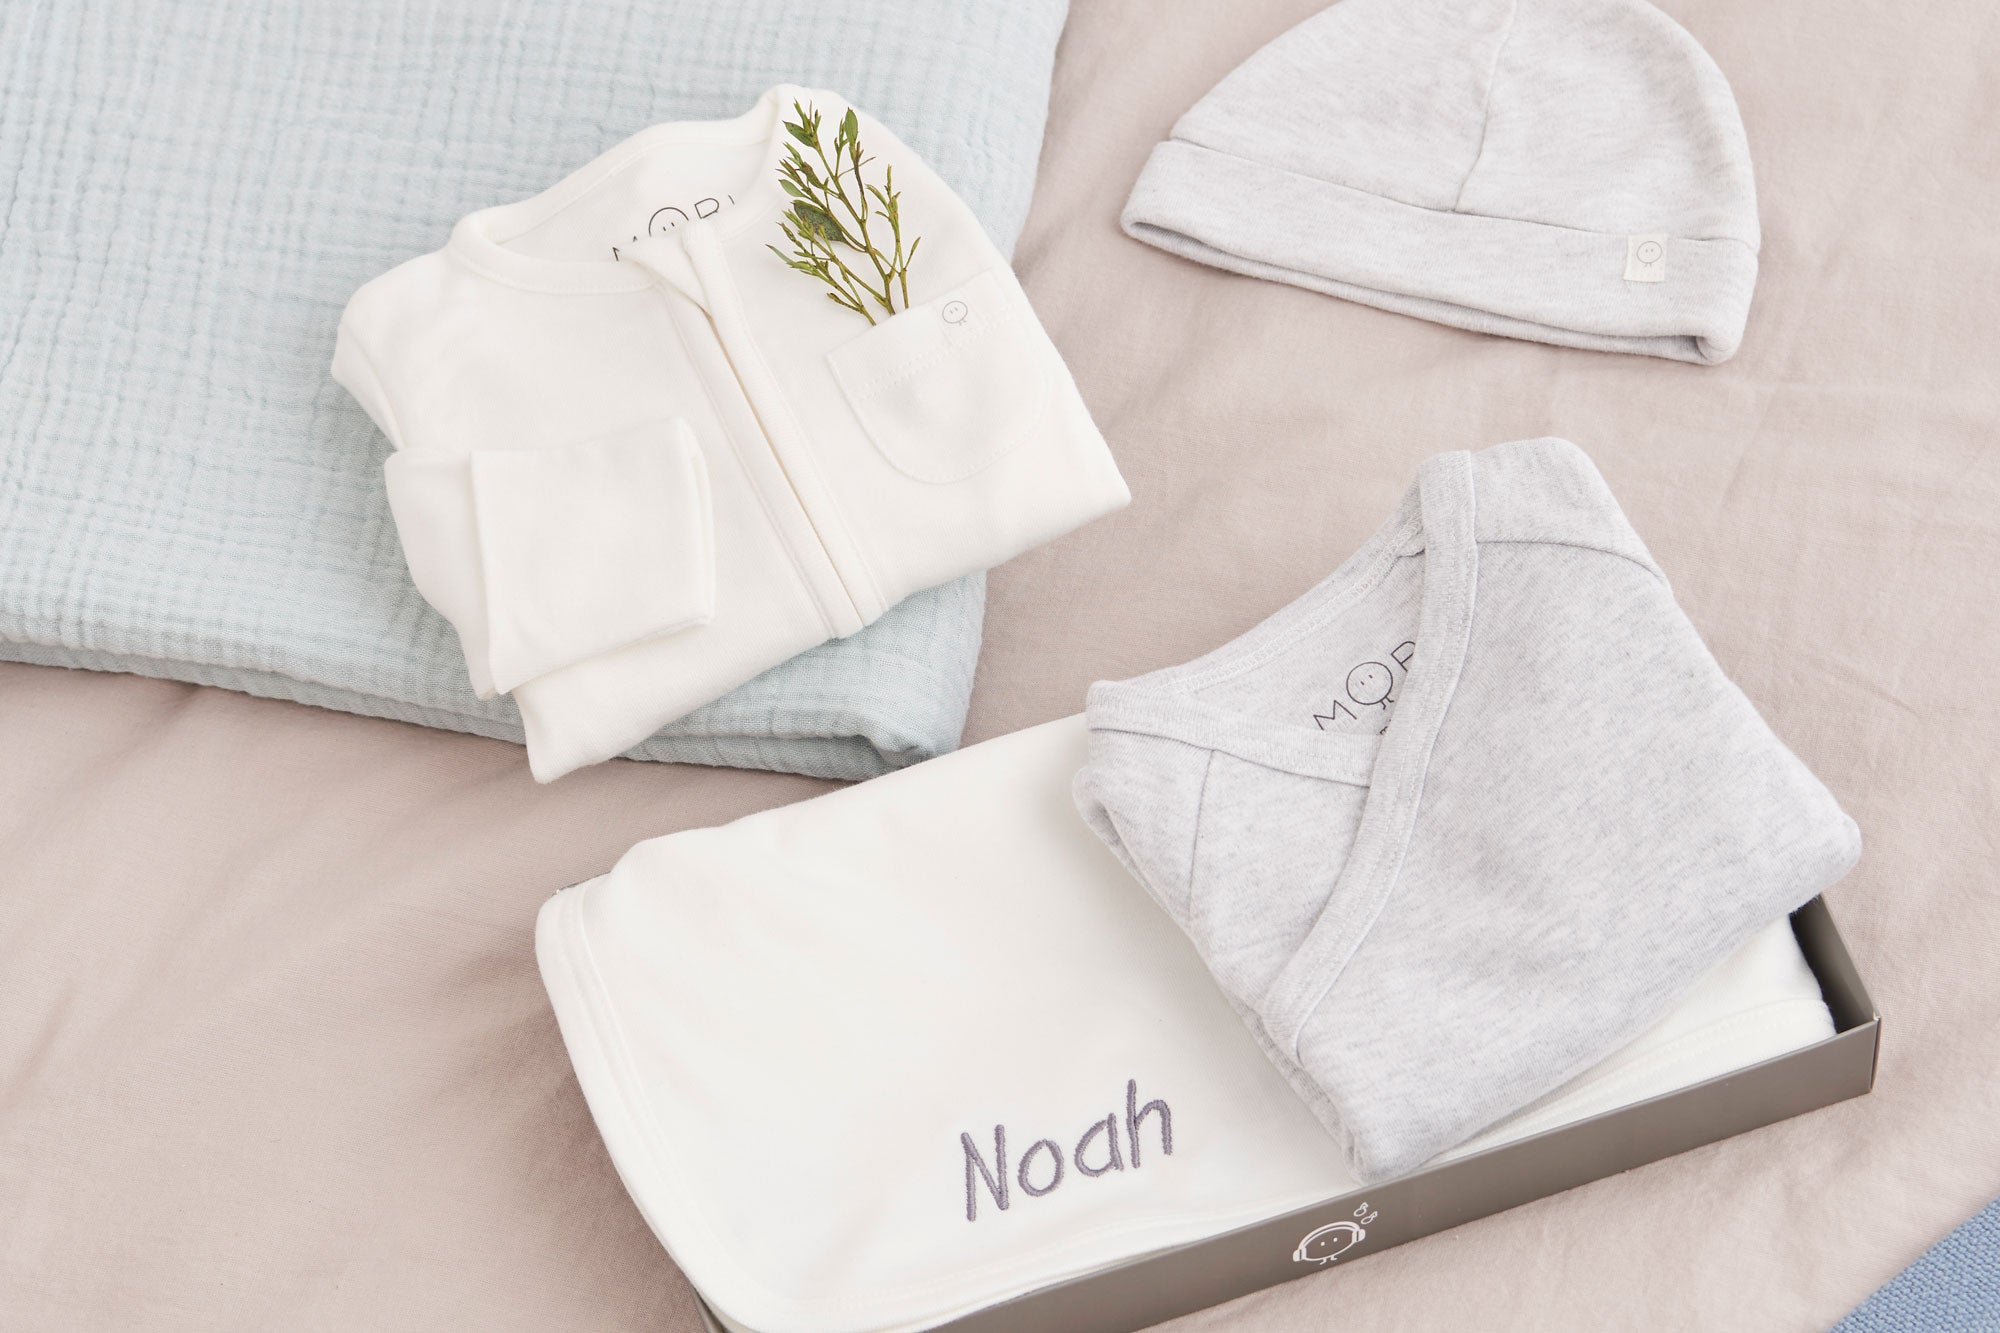 What Newborn Clothes Do I Need?